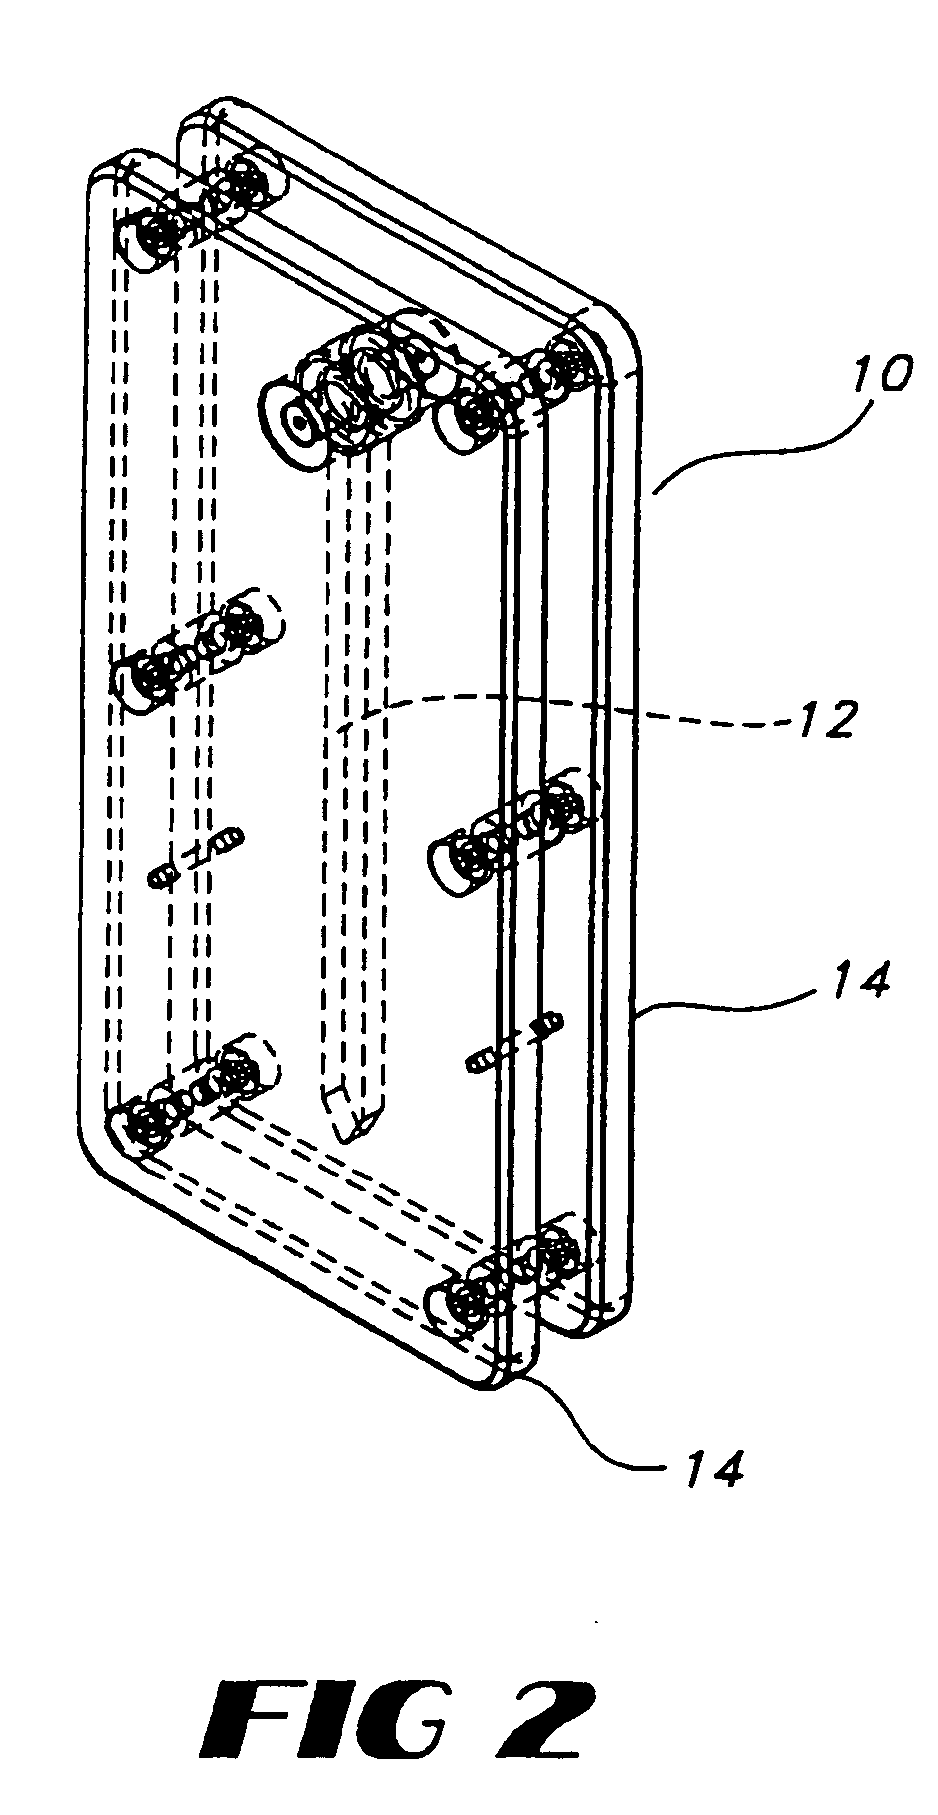 Method and apparatus for stereotactic implantation